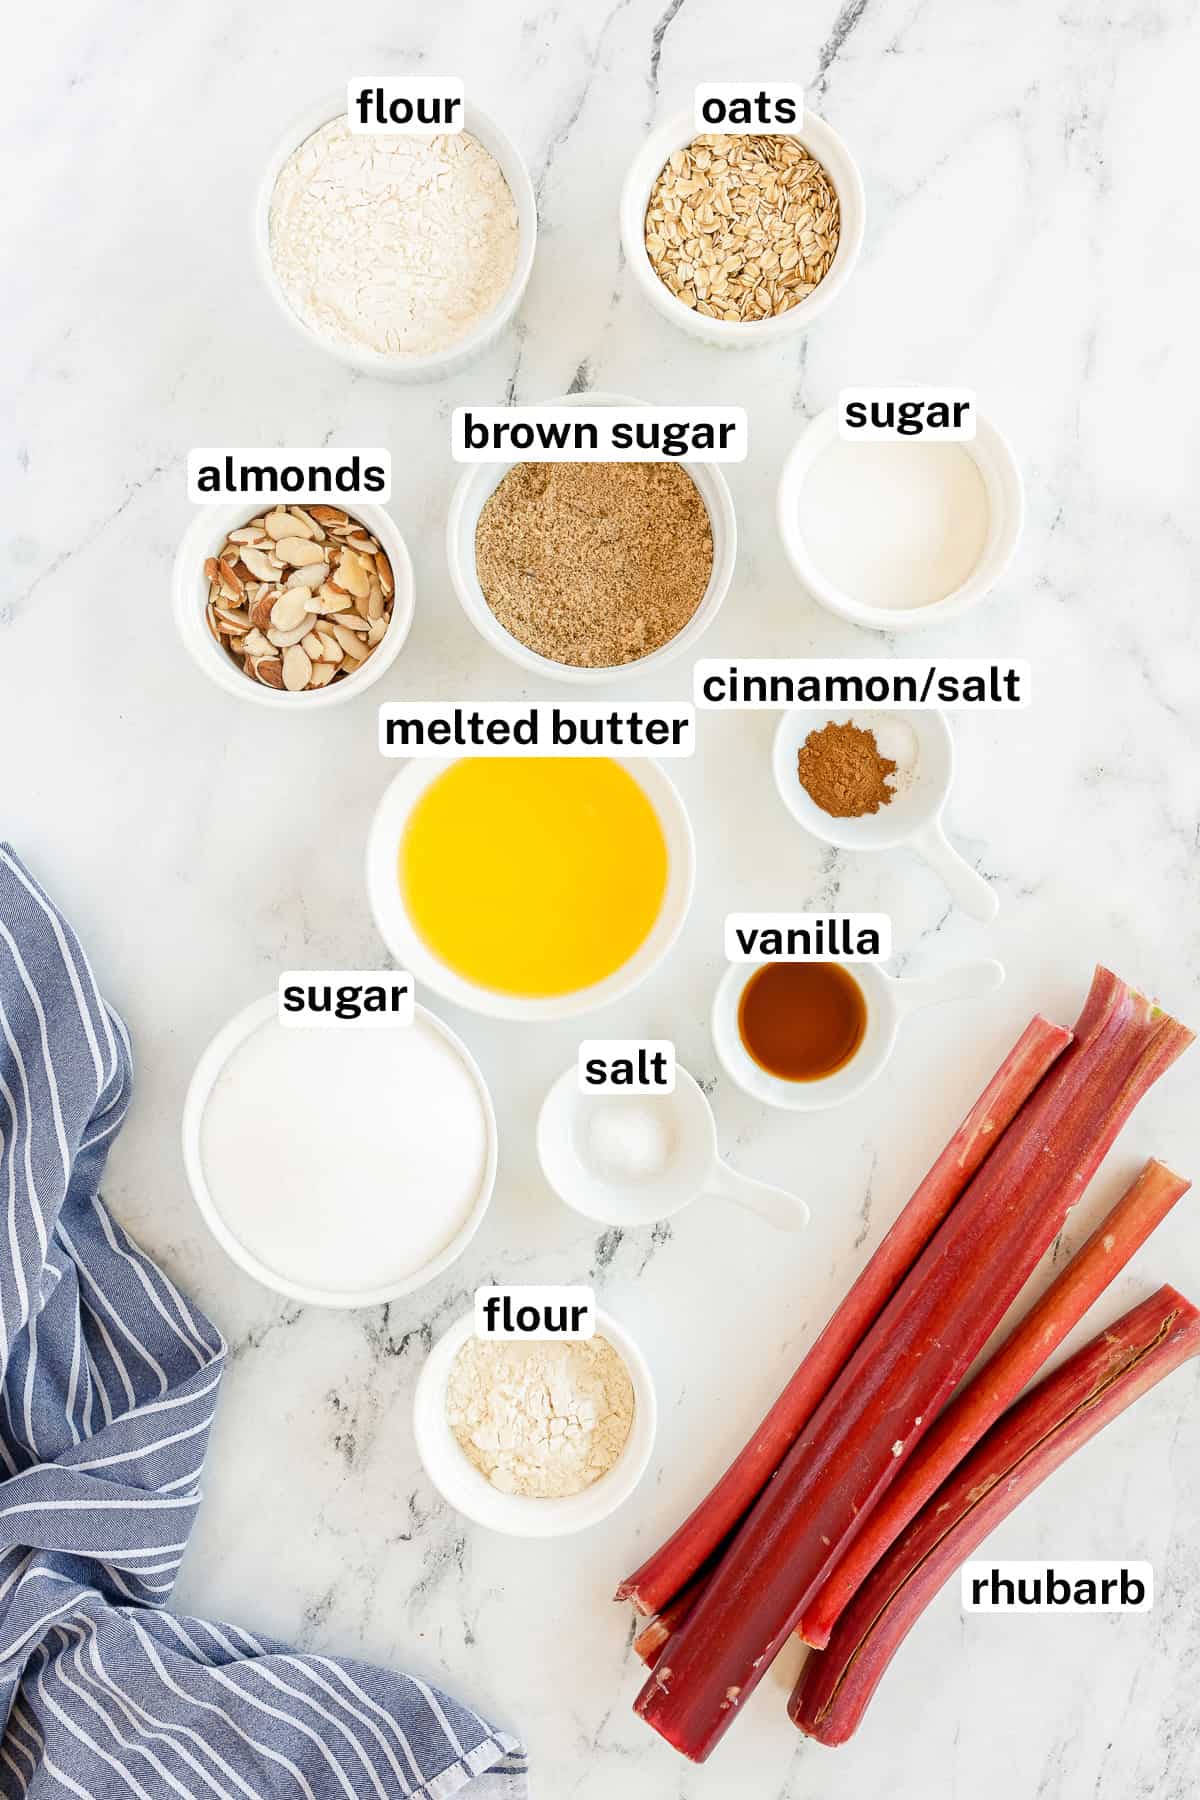 Ingredients for Rhubarb Crisp with text.